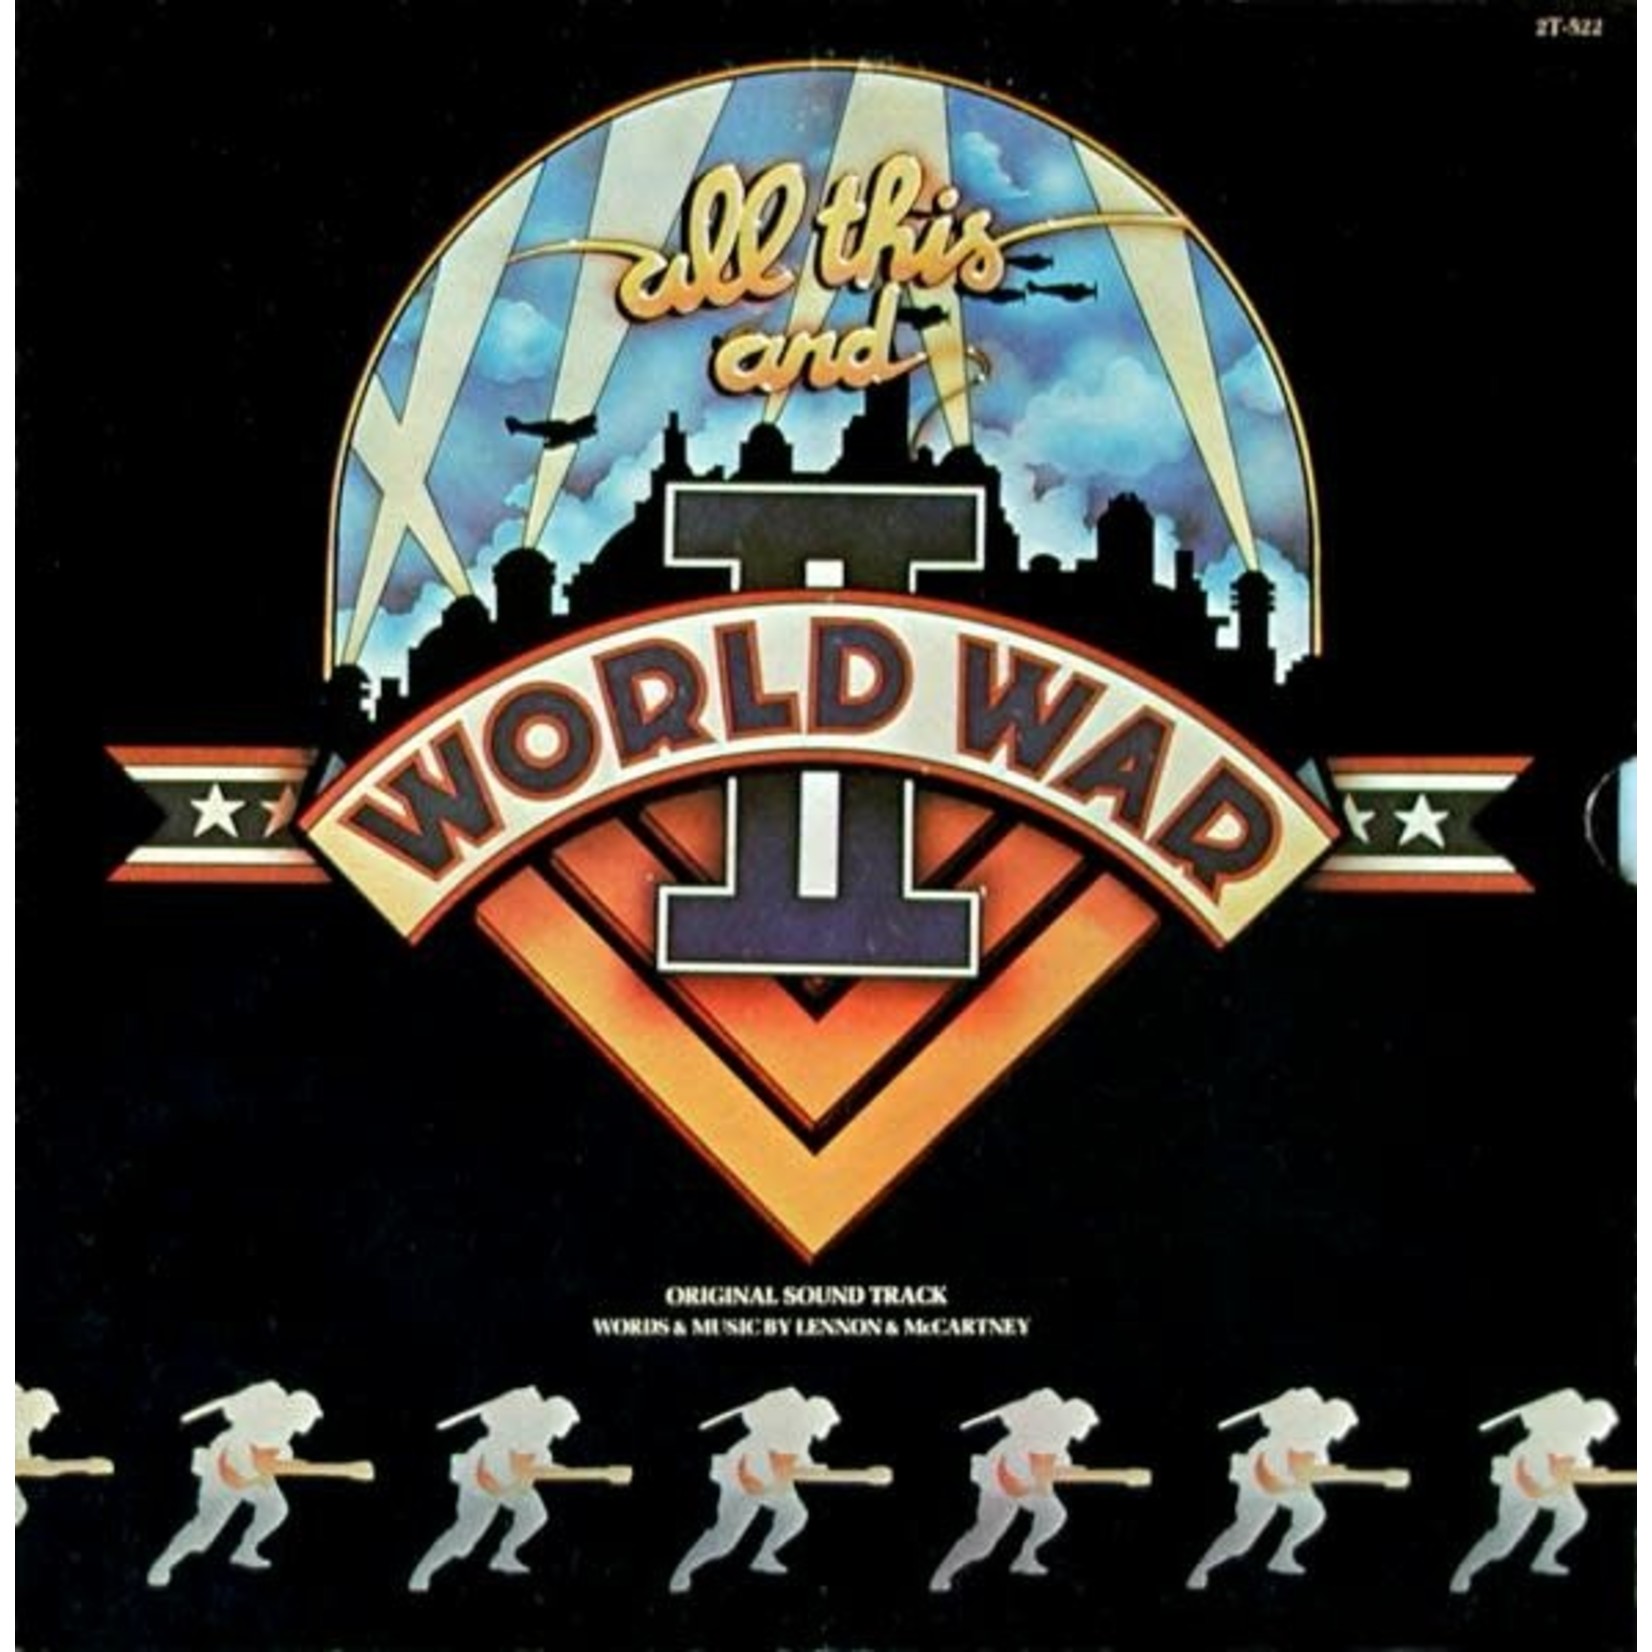 [Vintage] Various Artists - All This and World War II (soundtrack)